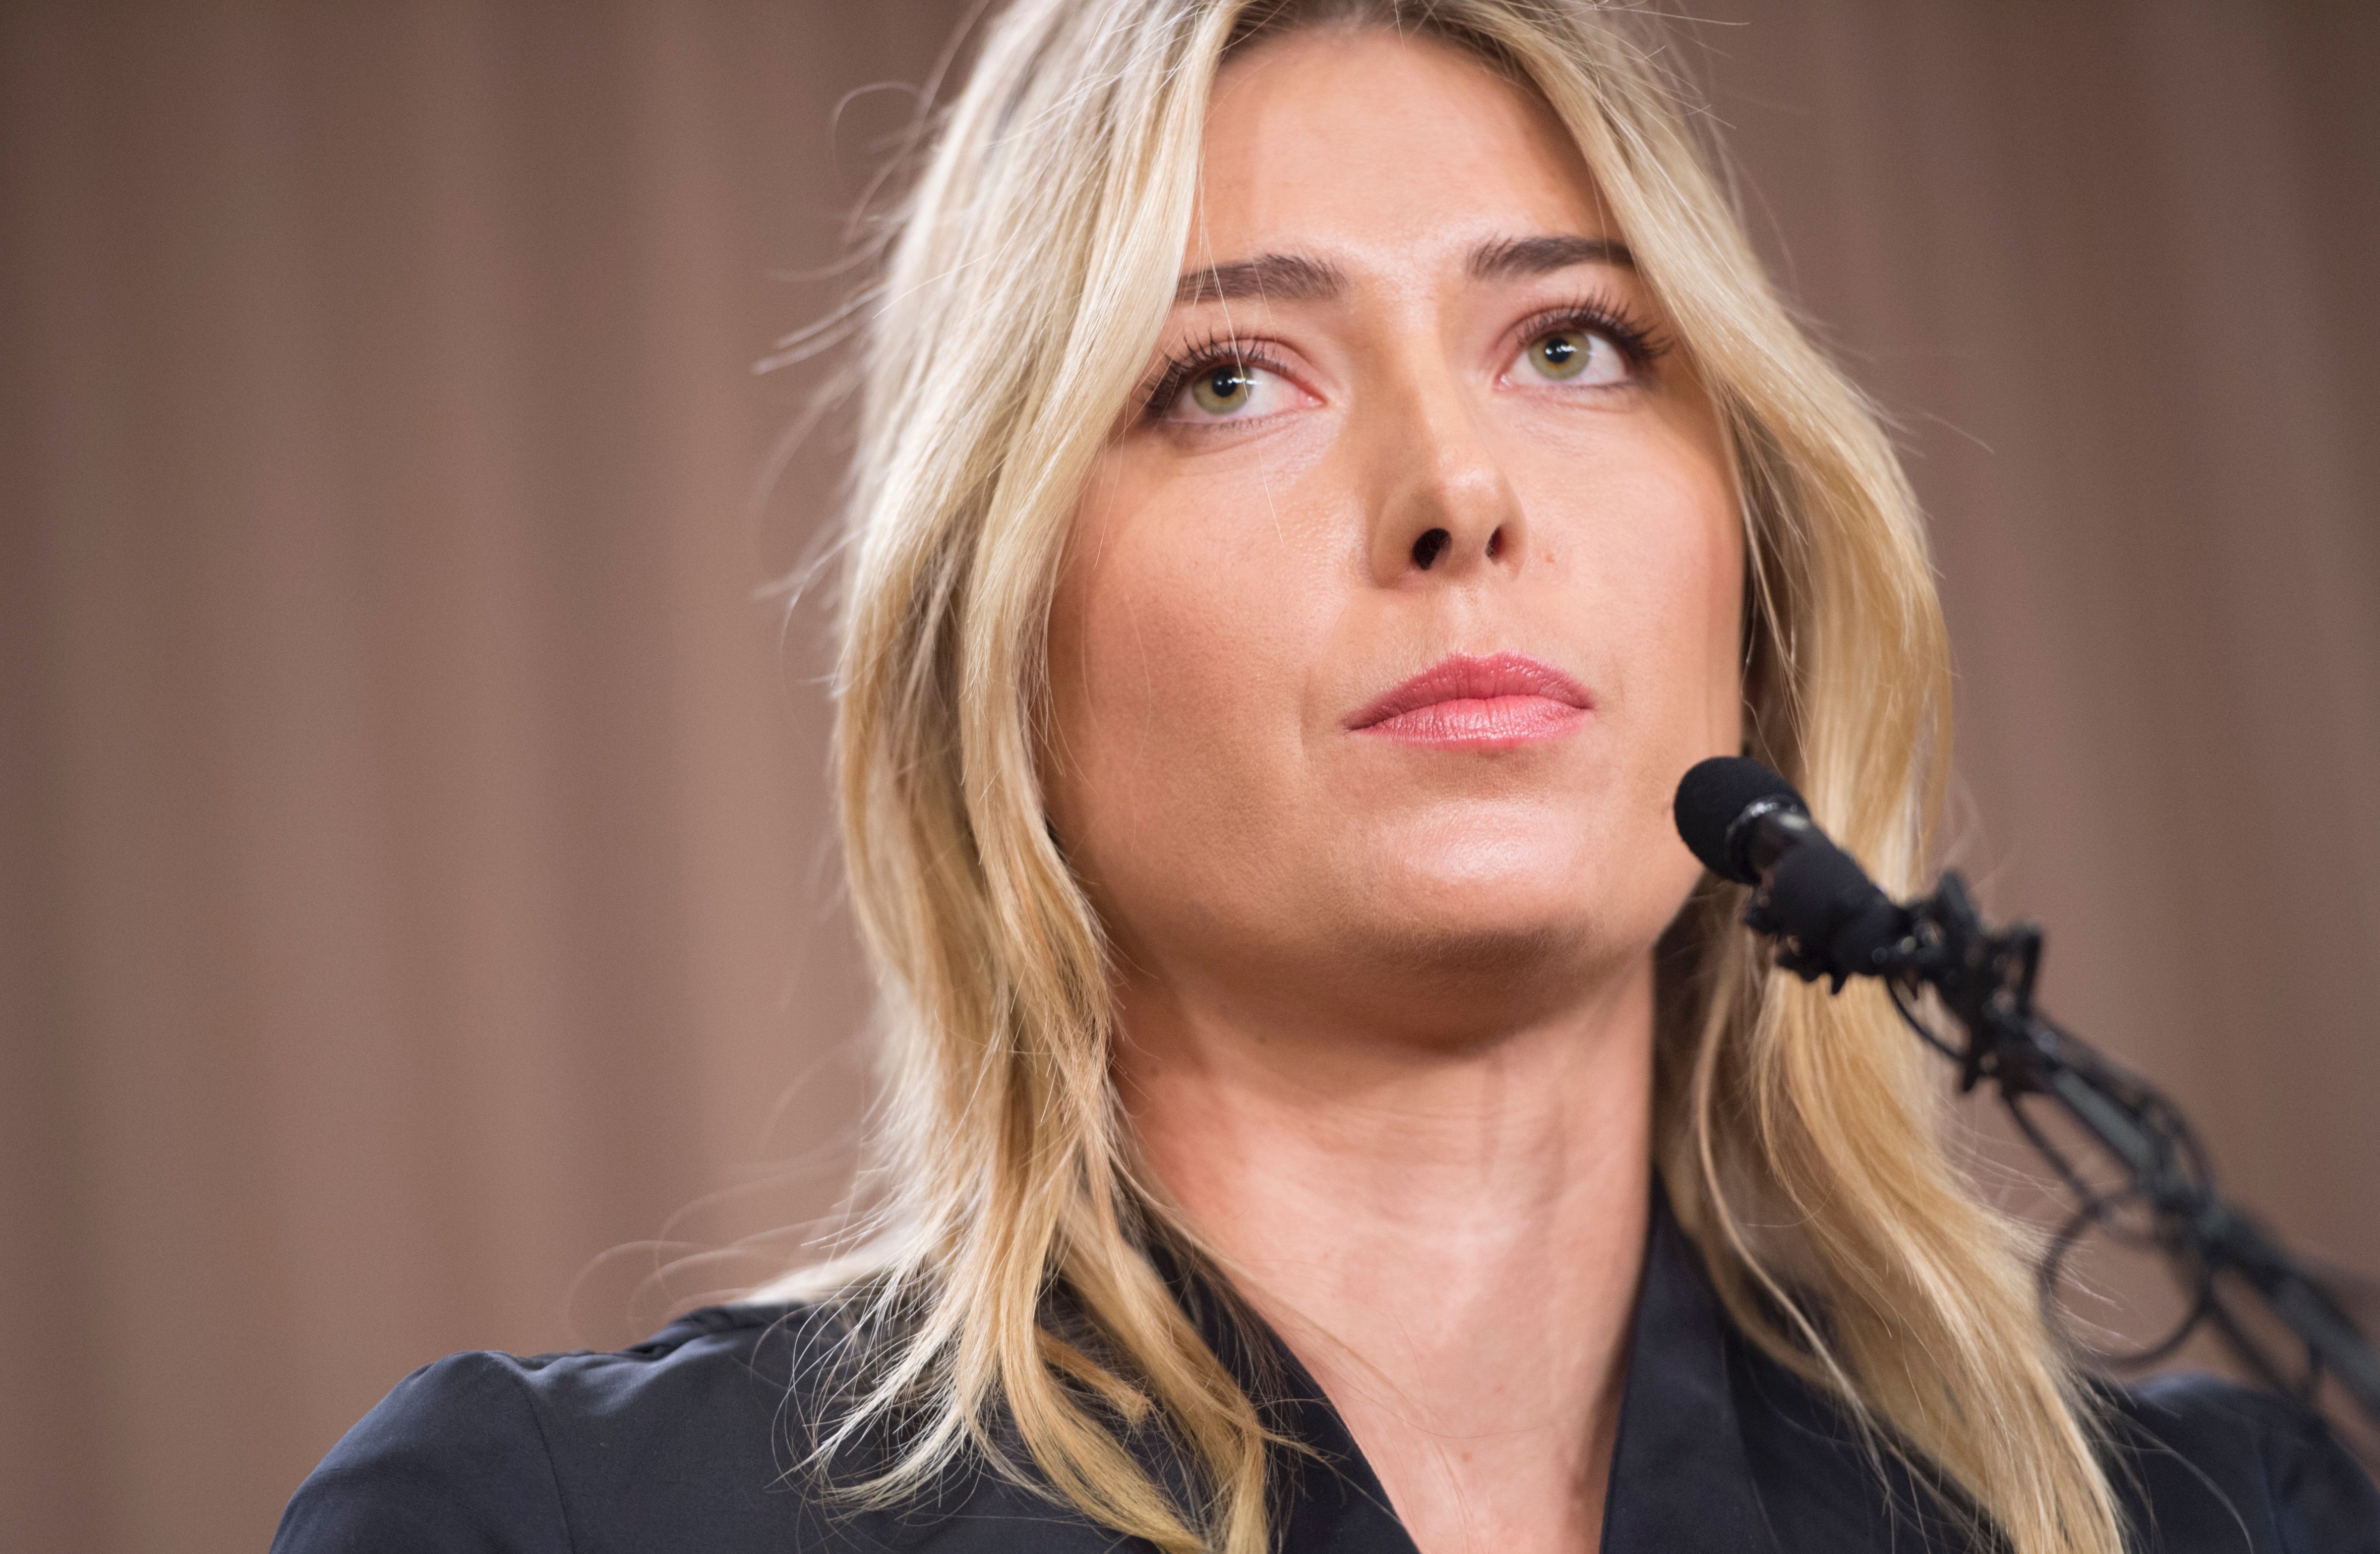 Russian tennis player Maria Sharapova speaks at a press conference in Los Angeles, on March 7, 2016.